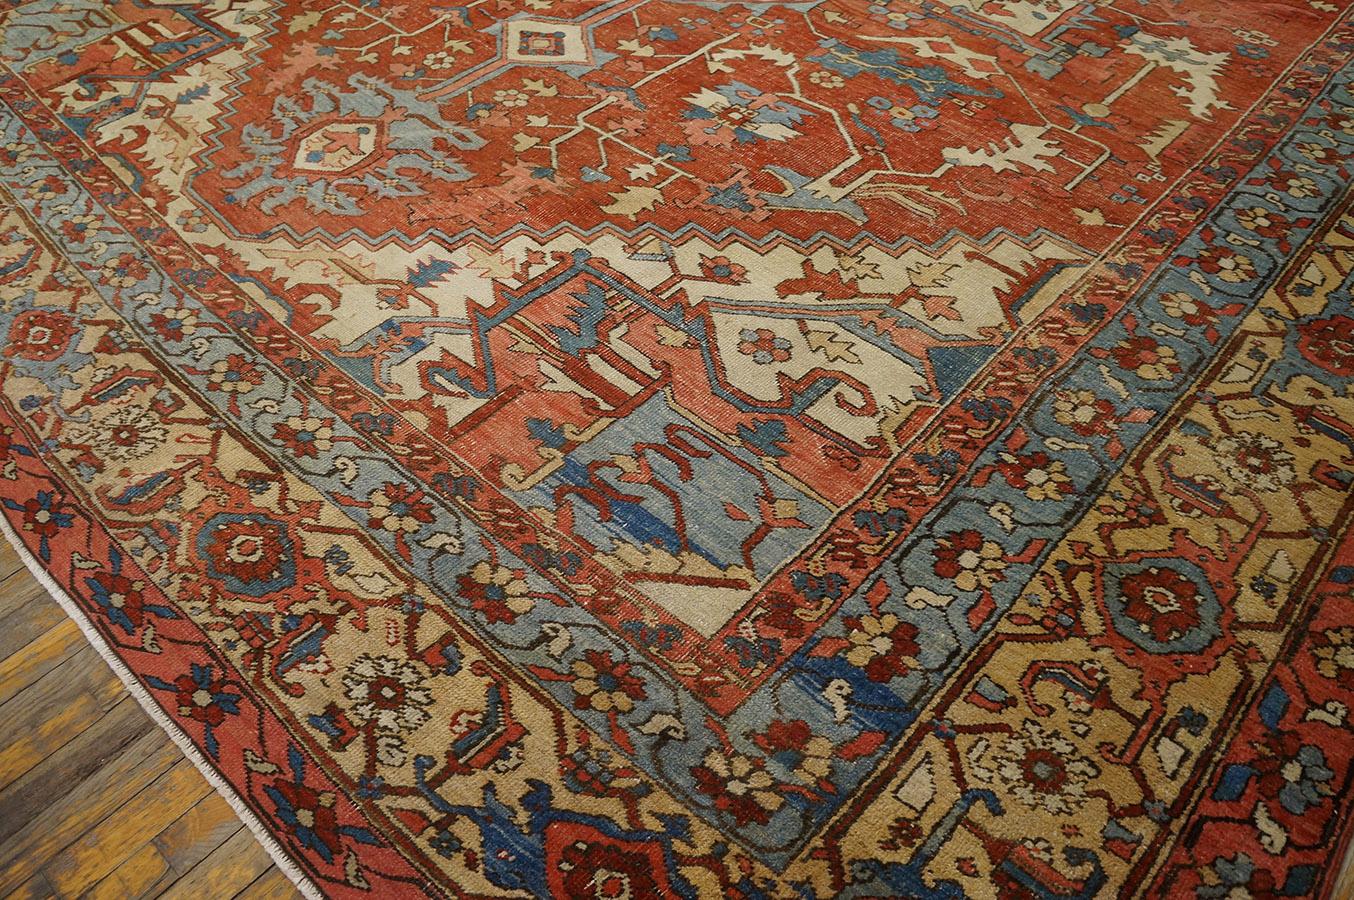 Late 19th Century Persian Serapi Carpet ( 12' x 18' - 366 x 548 cm ) In Good Condition For Sale In New York, NY